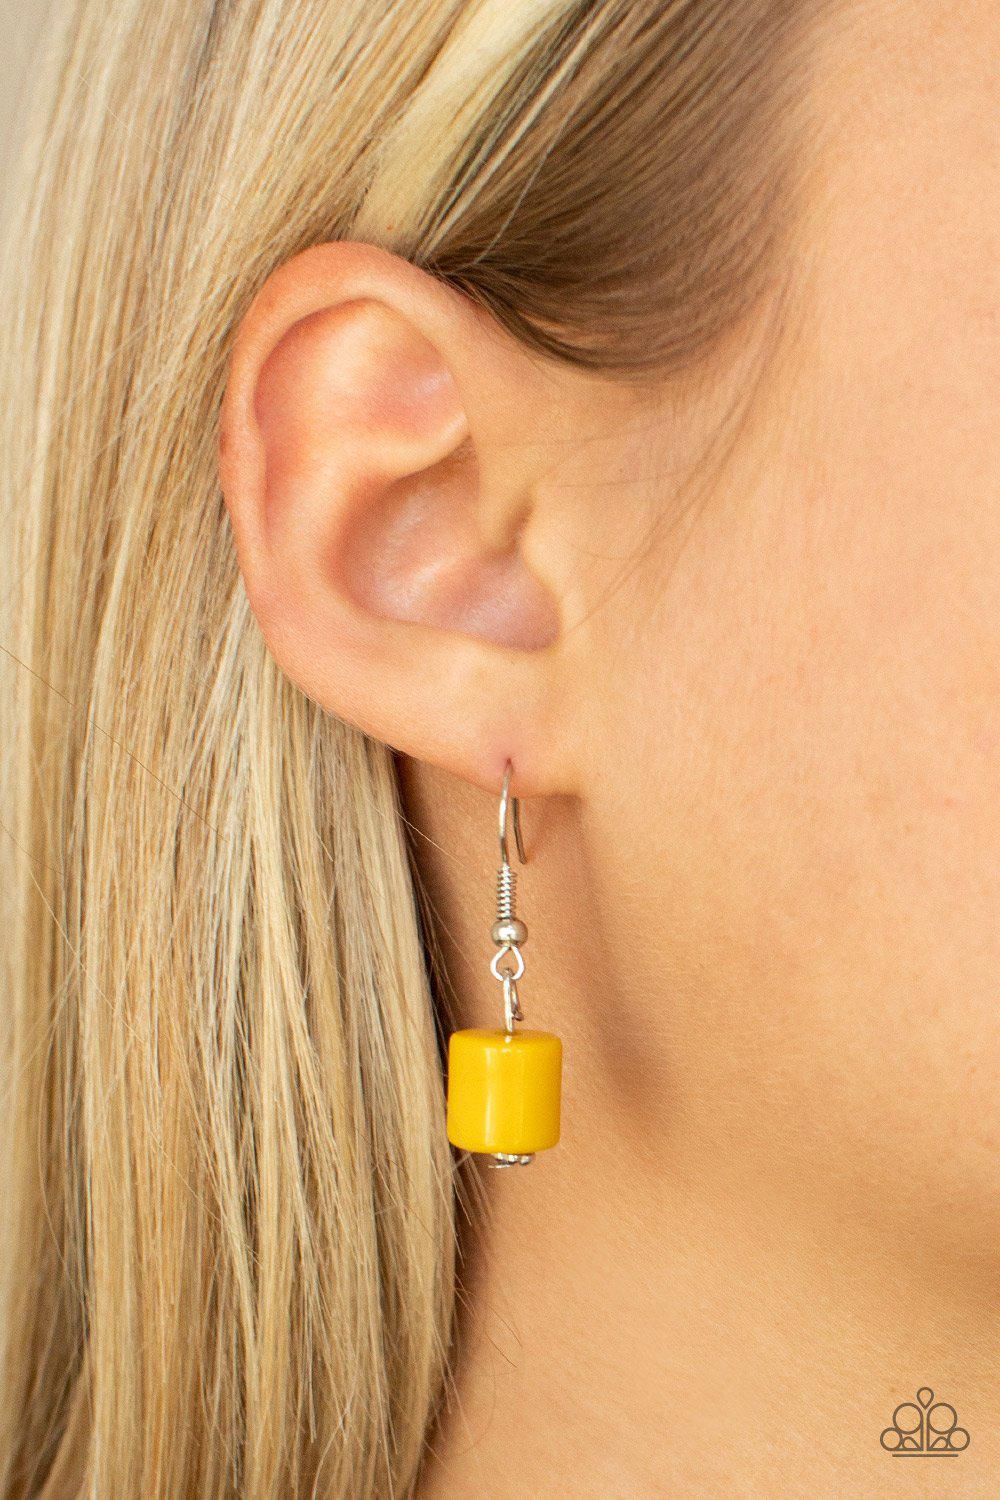 Tranquil Trendsetter Yellow and Brown Abstract Acrylic Necklace - Paparazzi Accessories 2021 Convention Exclusive - free matching earrings - CarasShop.com - $5 Jewelry by Cara Jewels